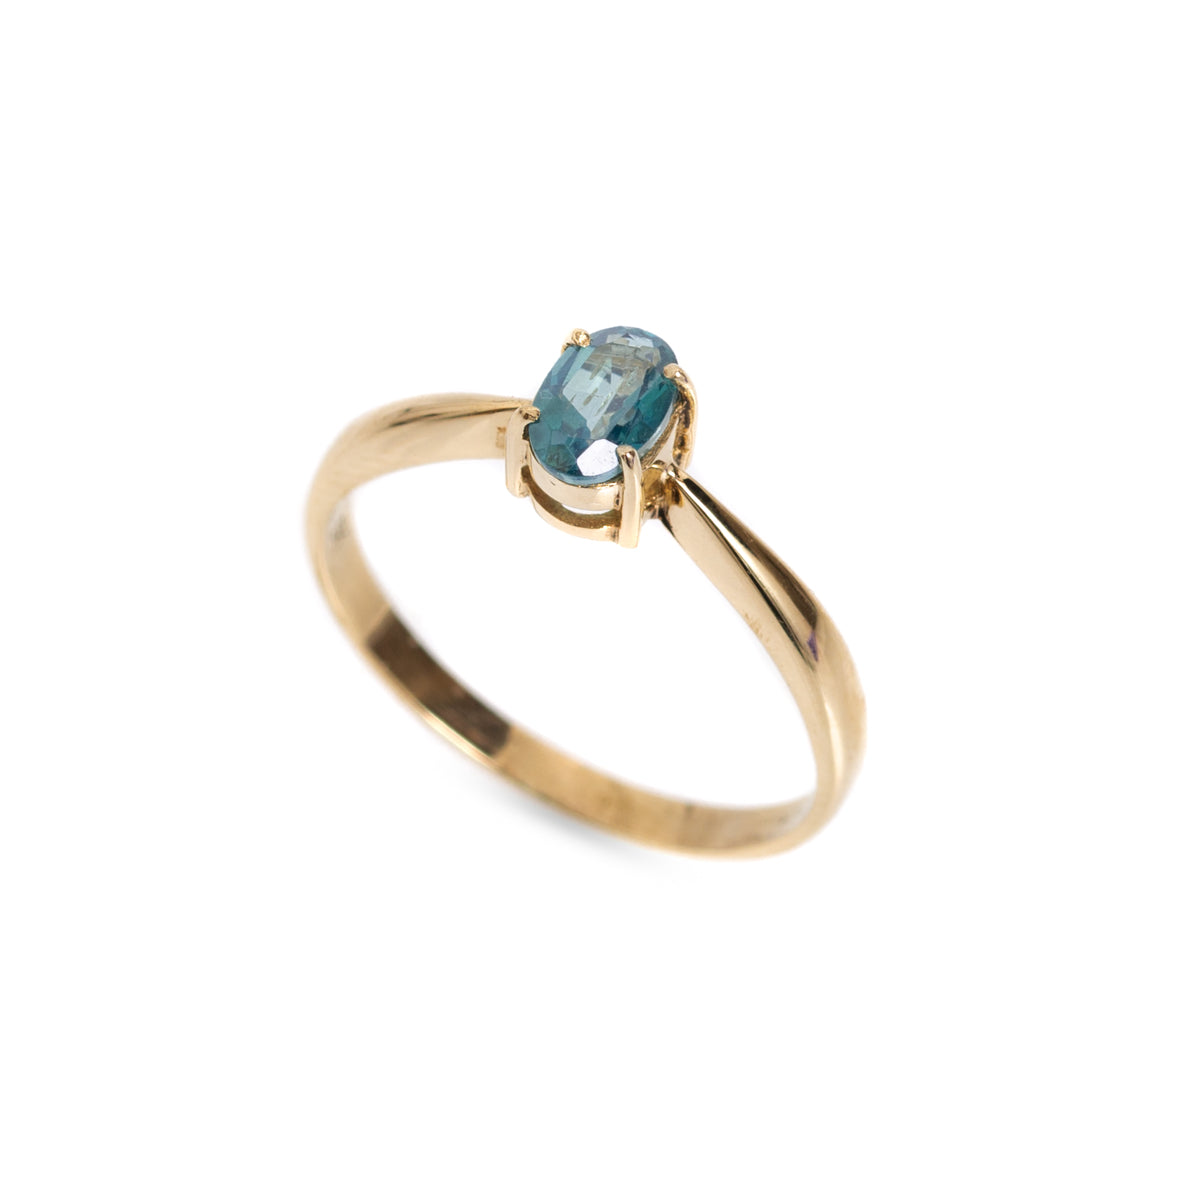 Vintage 9ct Gold Blue Topaz Solitaire Ring UK Size P (Code A1029)